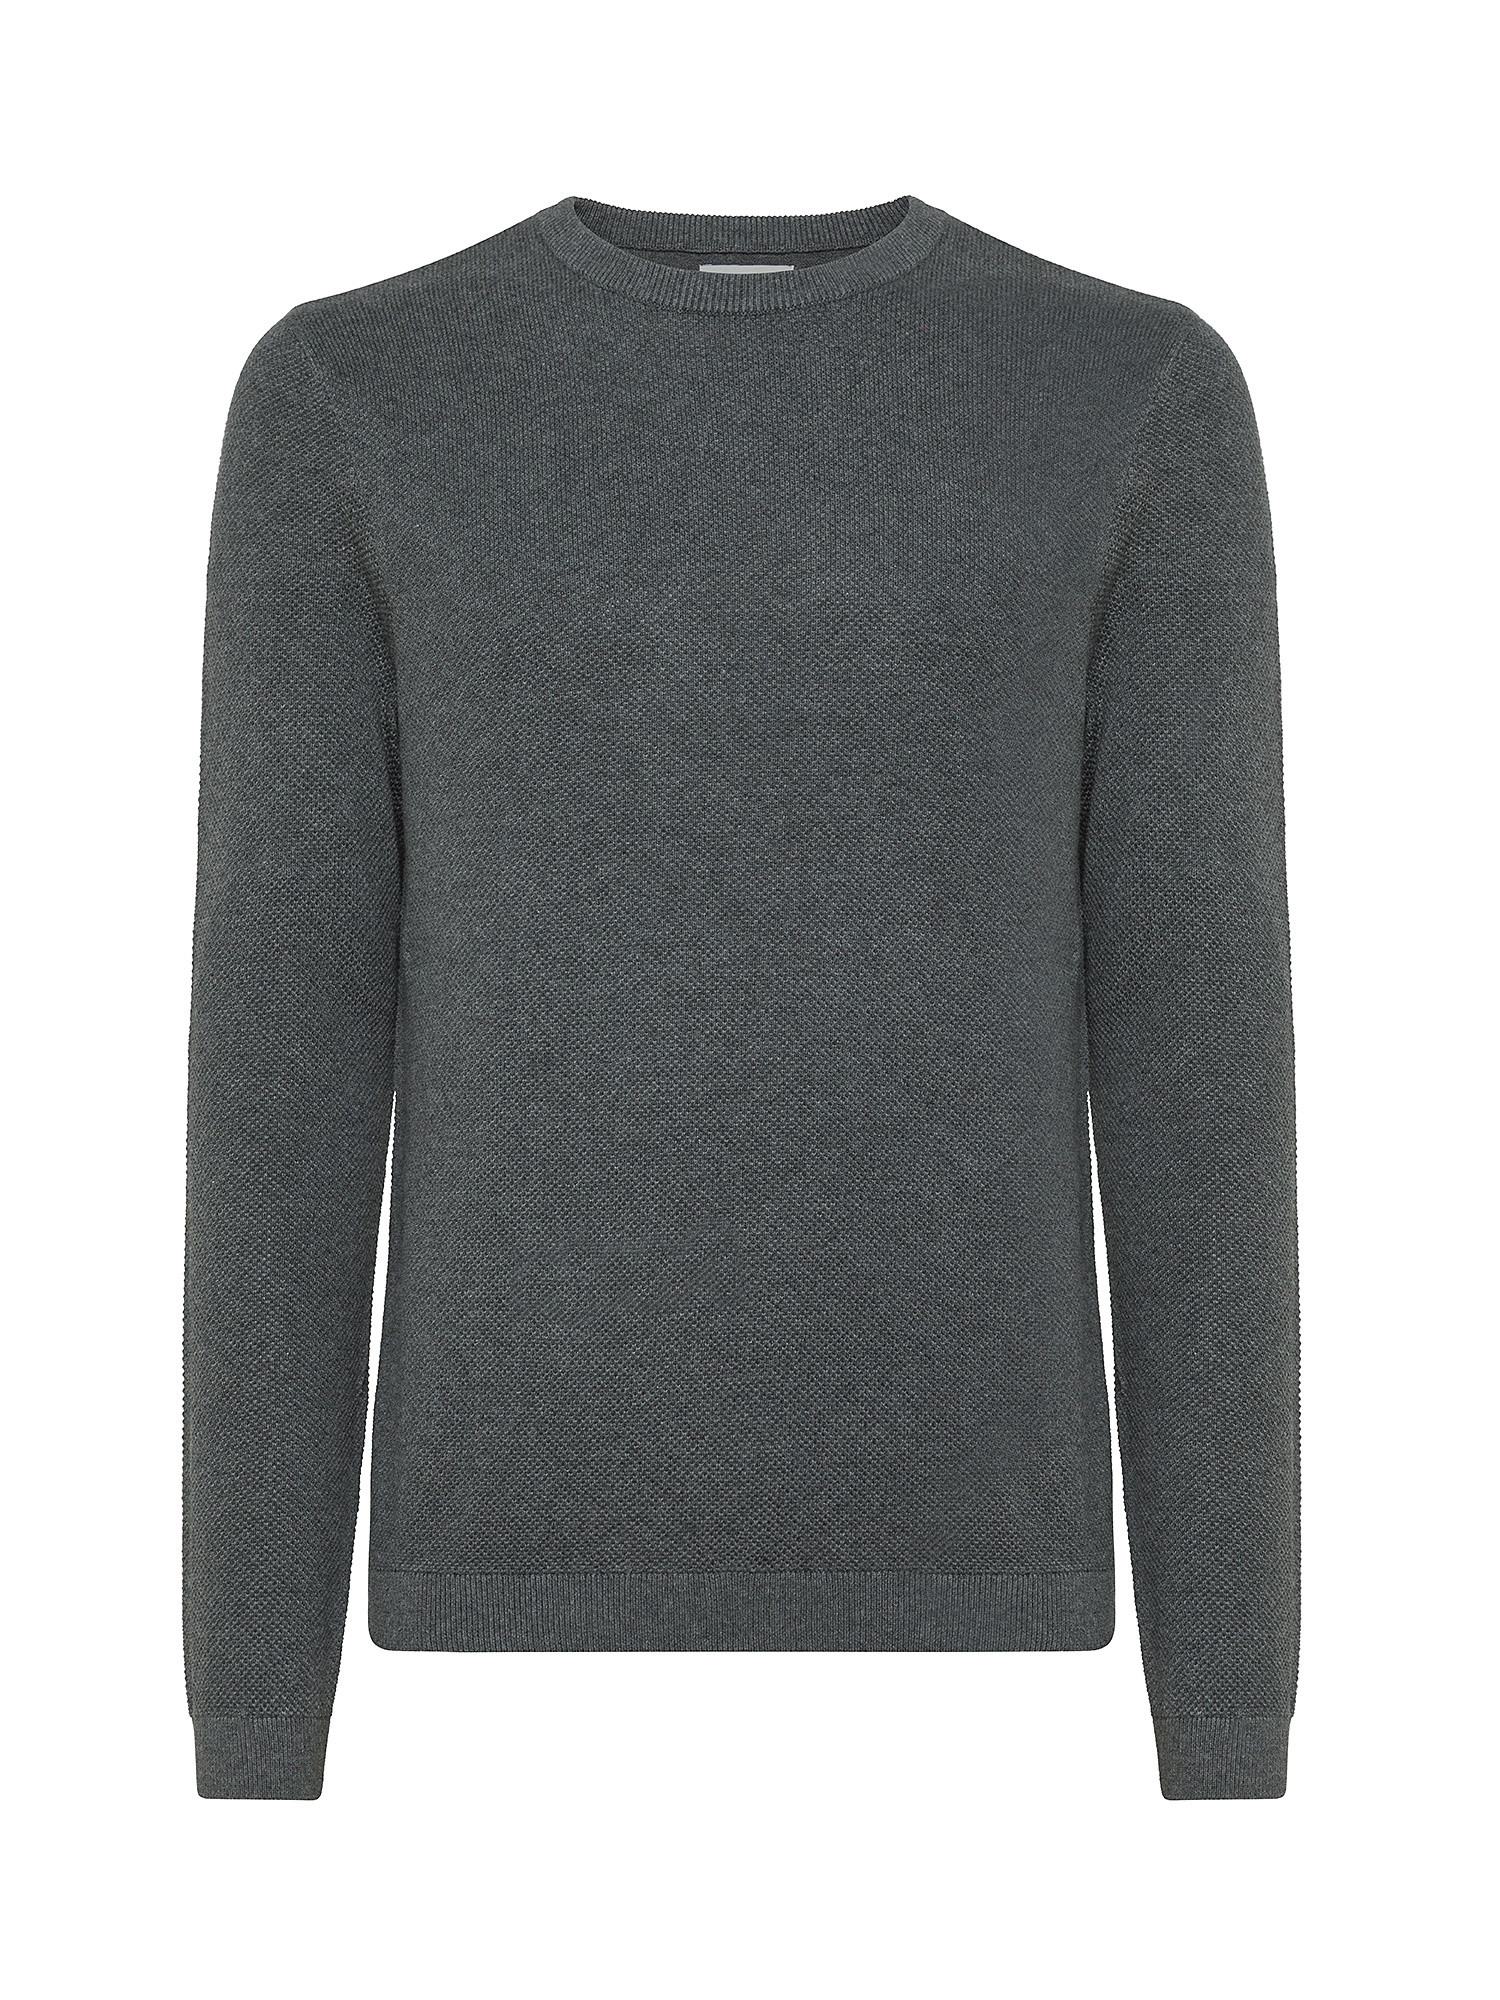 Luca D'Altieri - Crew neck sweater in pure cotton, Grey, large image number 0